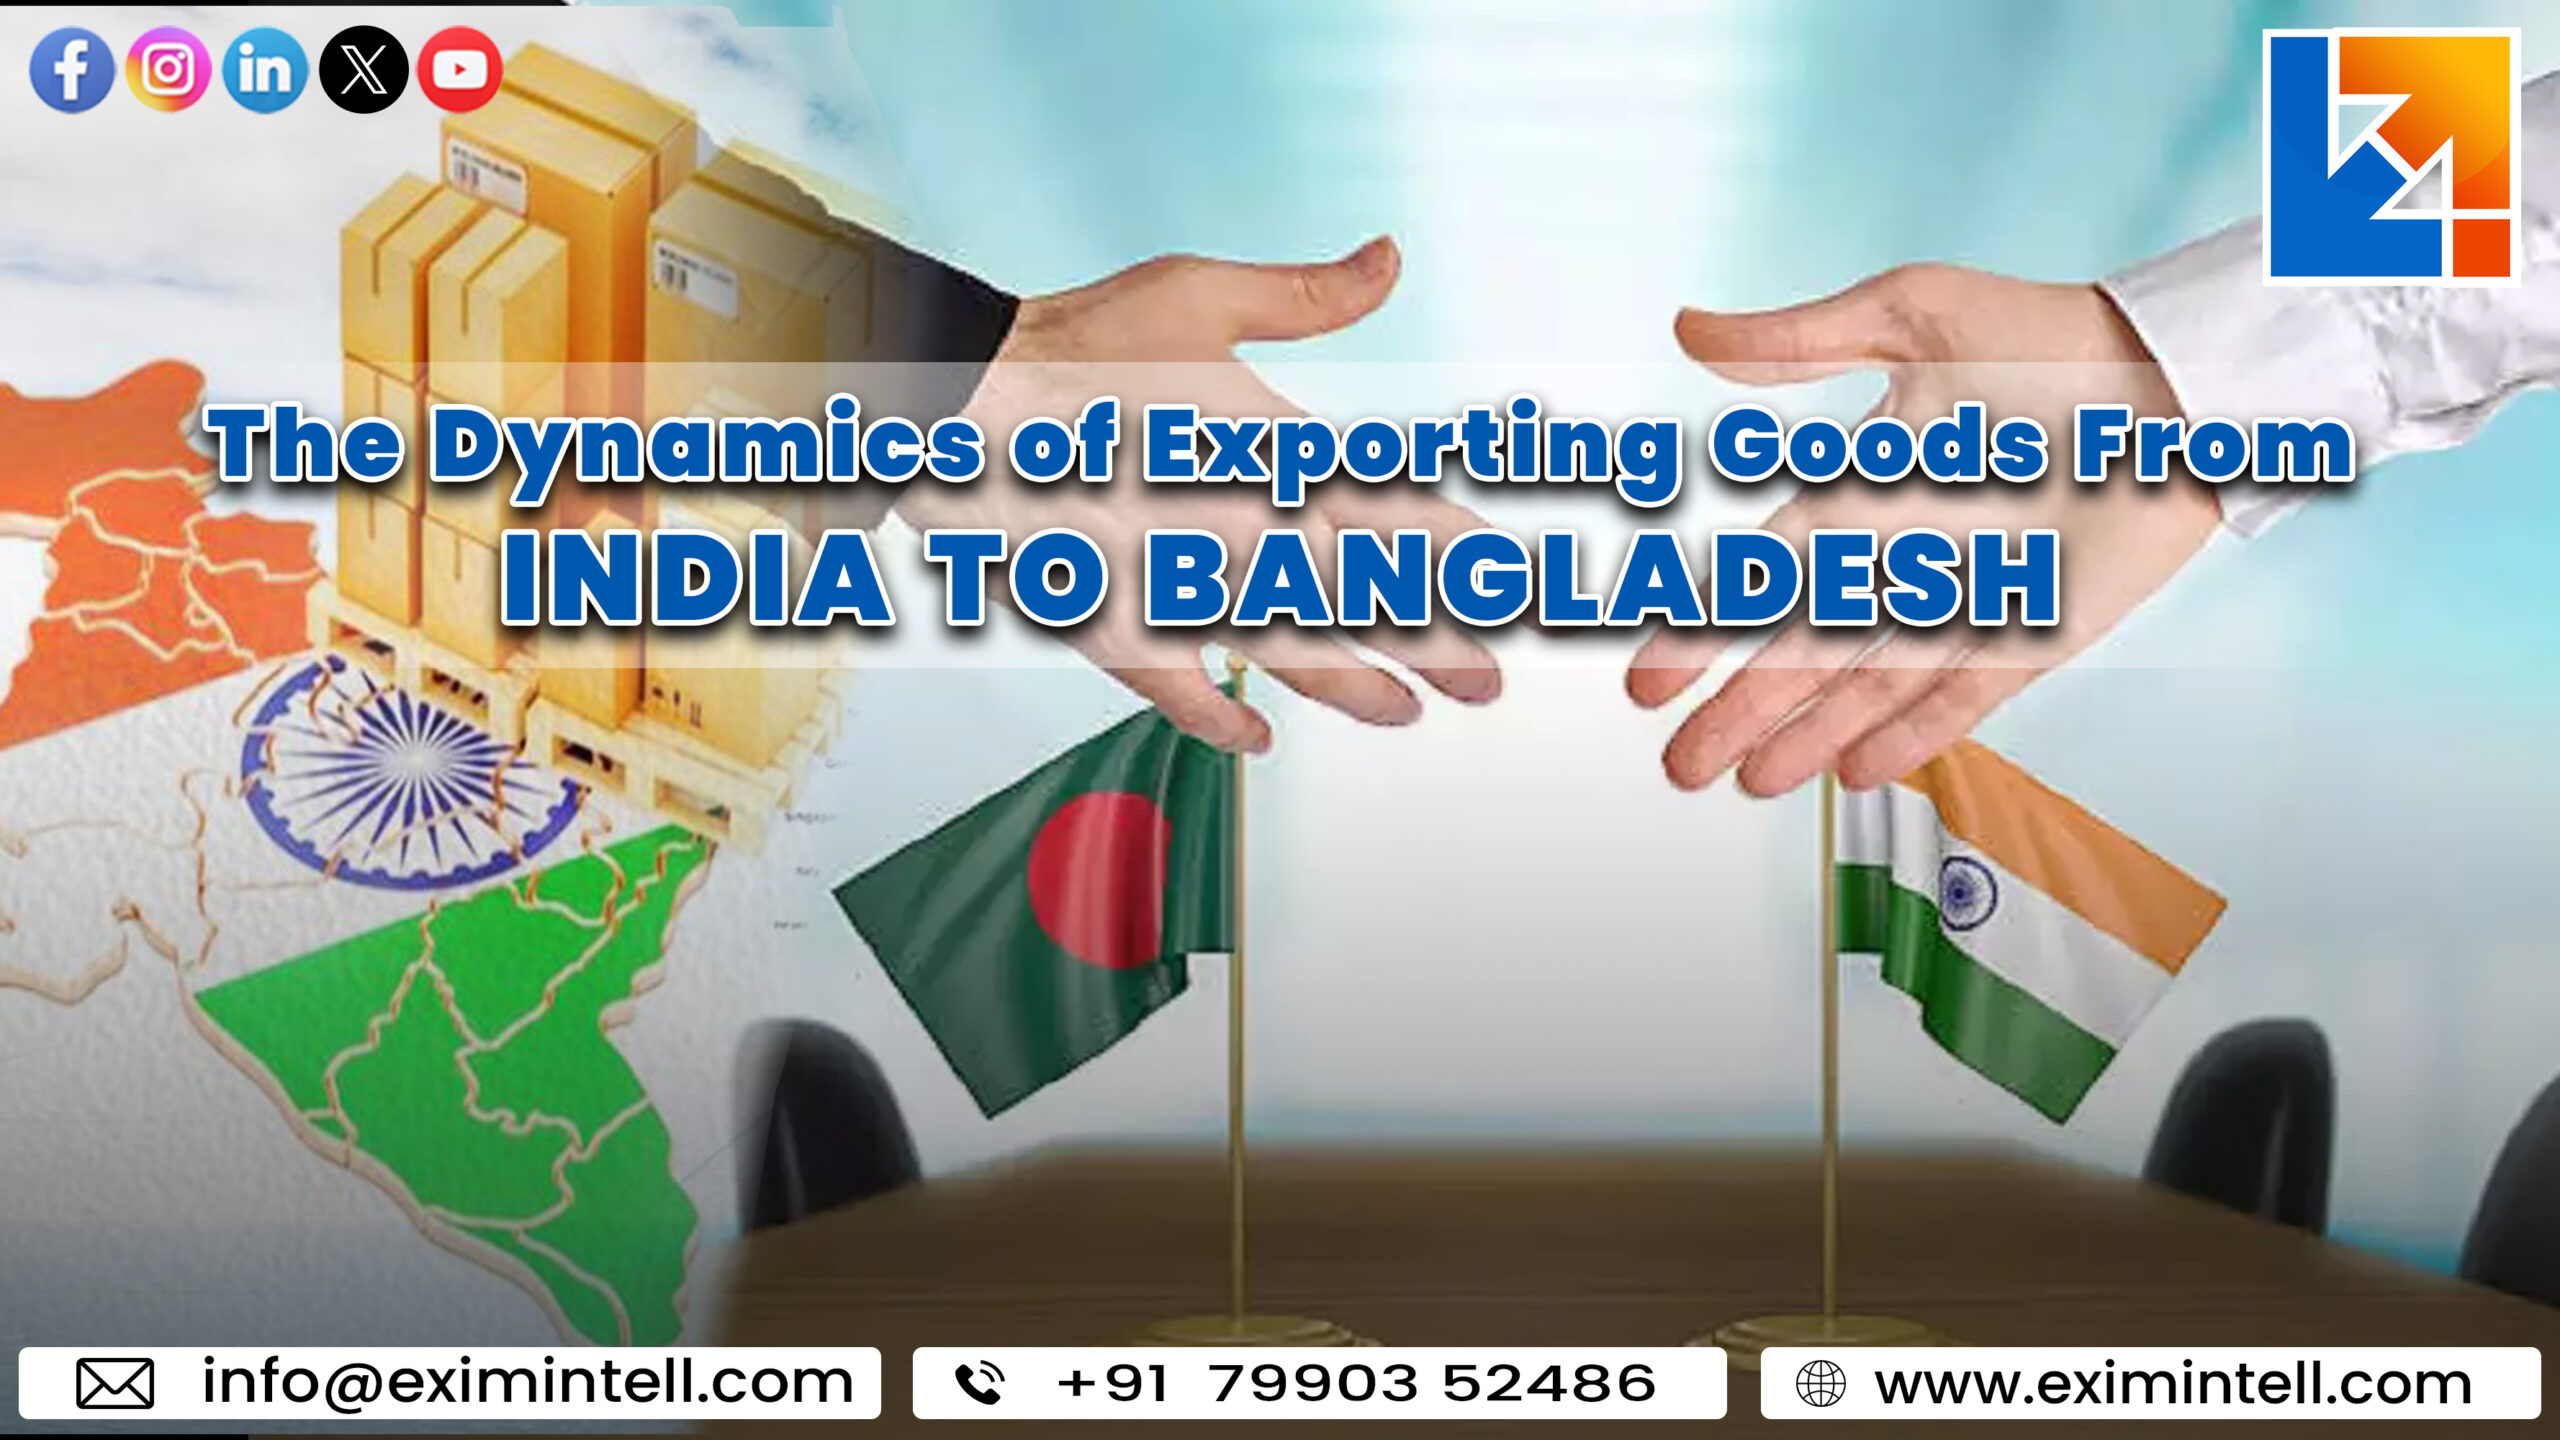 The Dynamics of Exporting Goods From India to Bangladesh